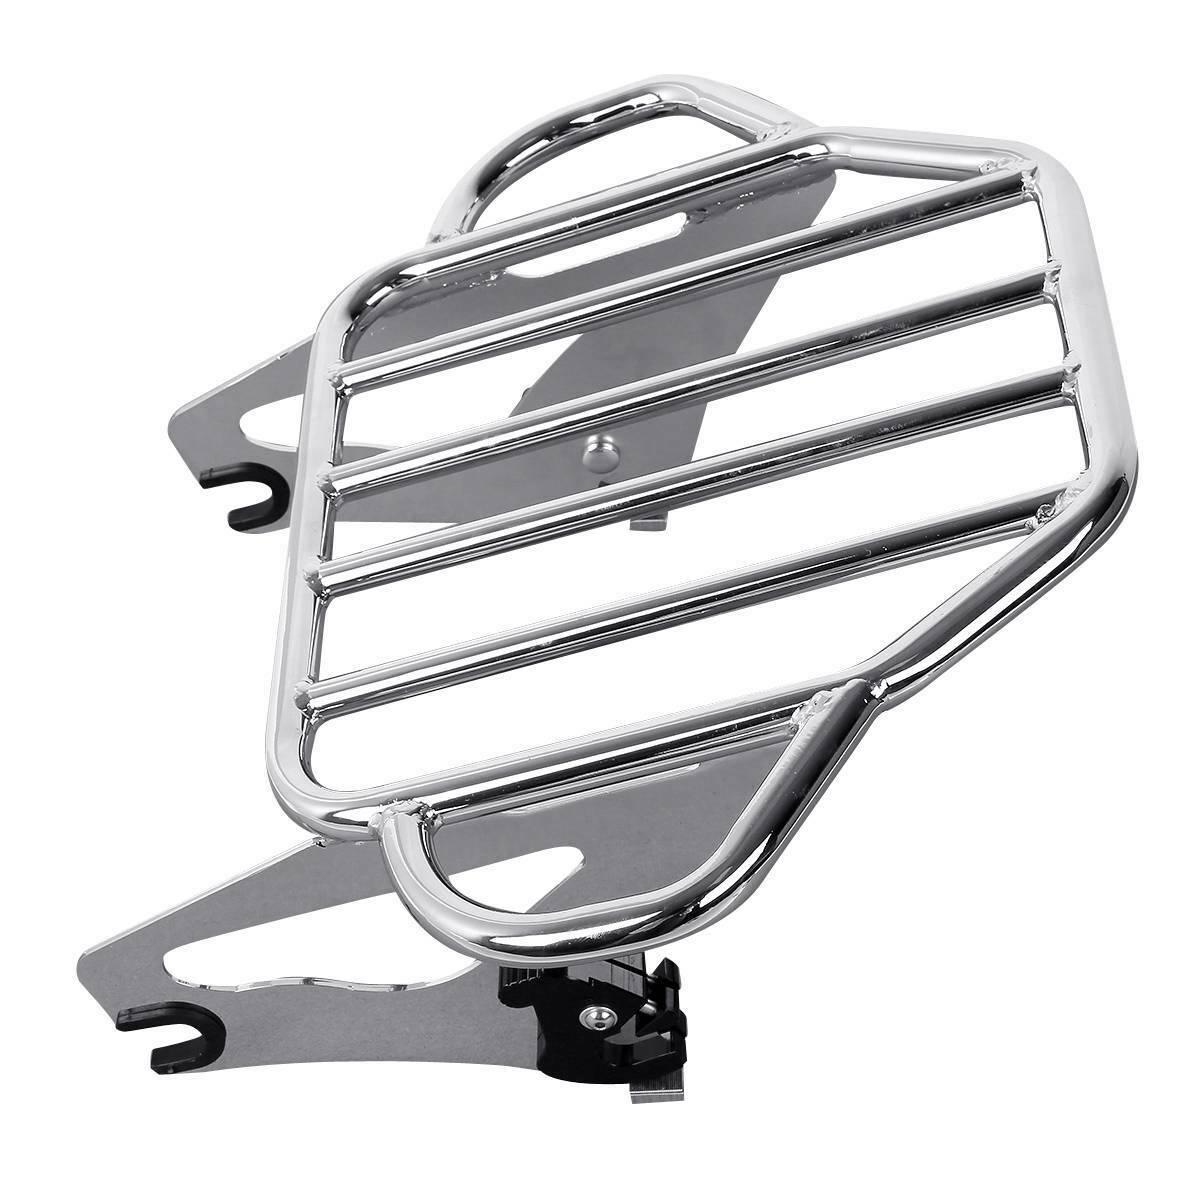 Detachable Two Up Mount Luggage Rack Fit For Harley Road Street Glide 2009-2022 - Moto Life Products